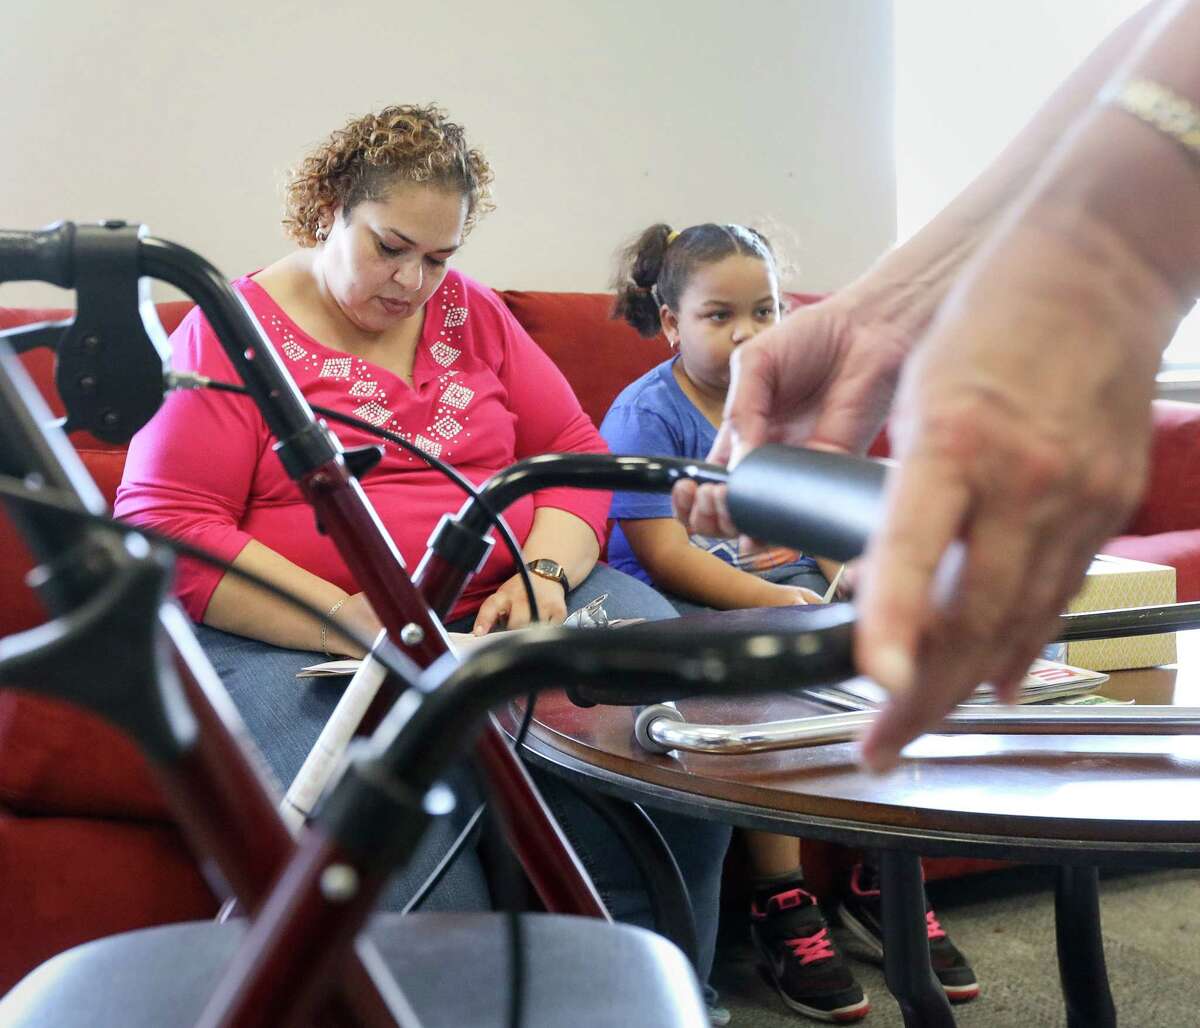 Patricia Morgan, left, and her daughter Danika, 7, fill out paperwork as Theresa Gregorio-Torres, an occupational therapist, explains the features of Morgan's new walker, during a medical supply donation event, Saturday, Sept. 9, 2017, in Houston. "I wasn't expecting all of this," Morgan said.